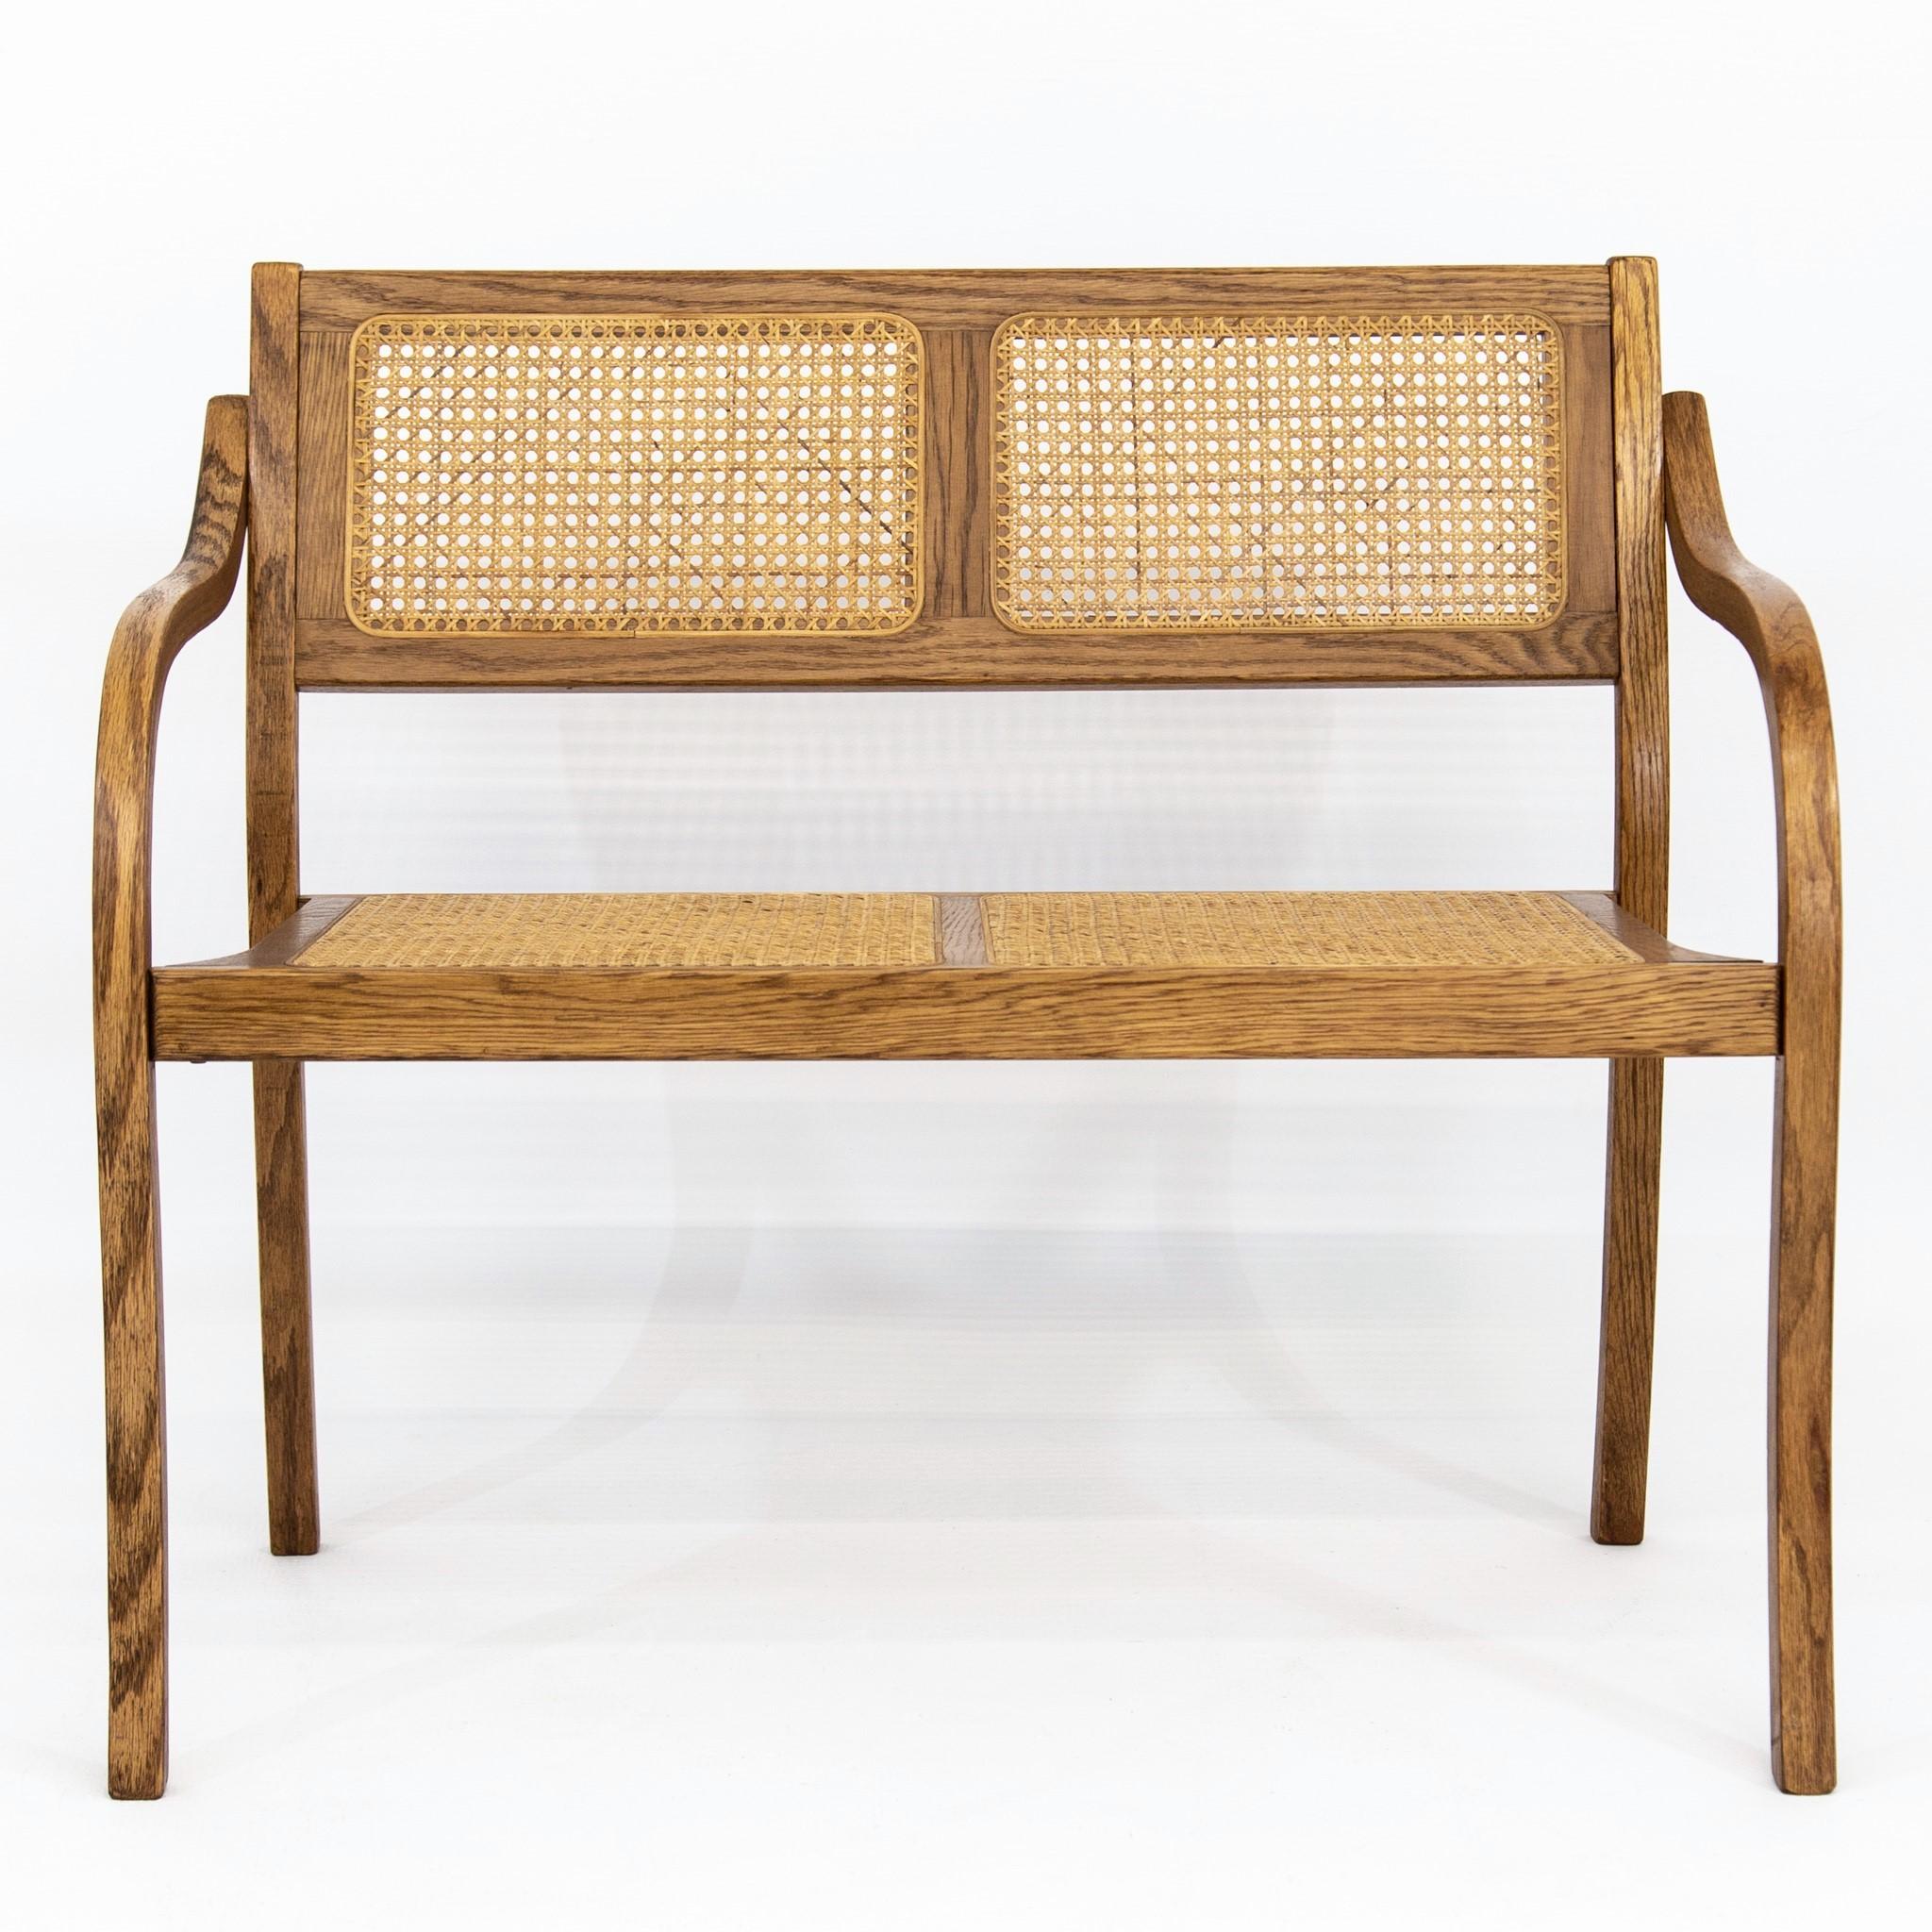 Mid-century beautifully grained oak settee, bench or loveseat with bentwood arms and caned back and seat. Seat, 18